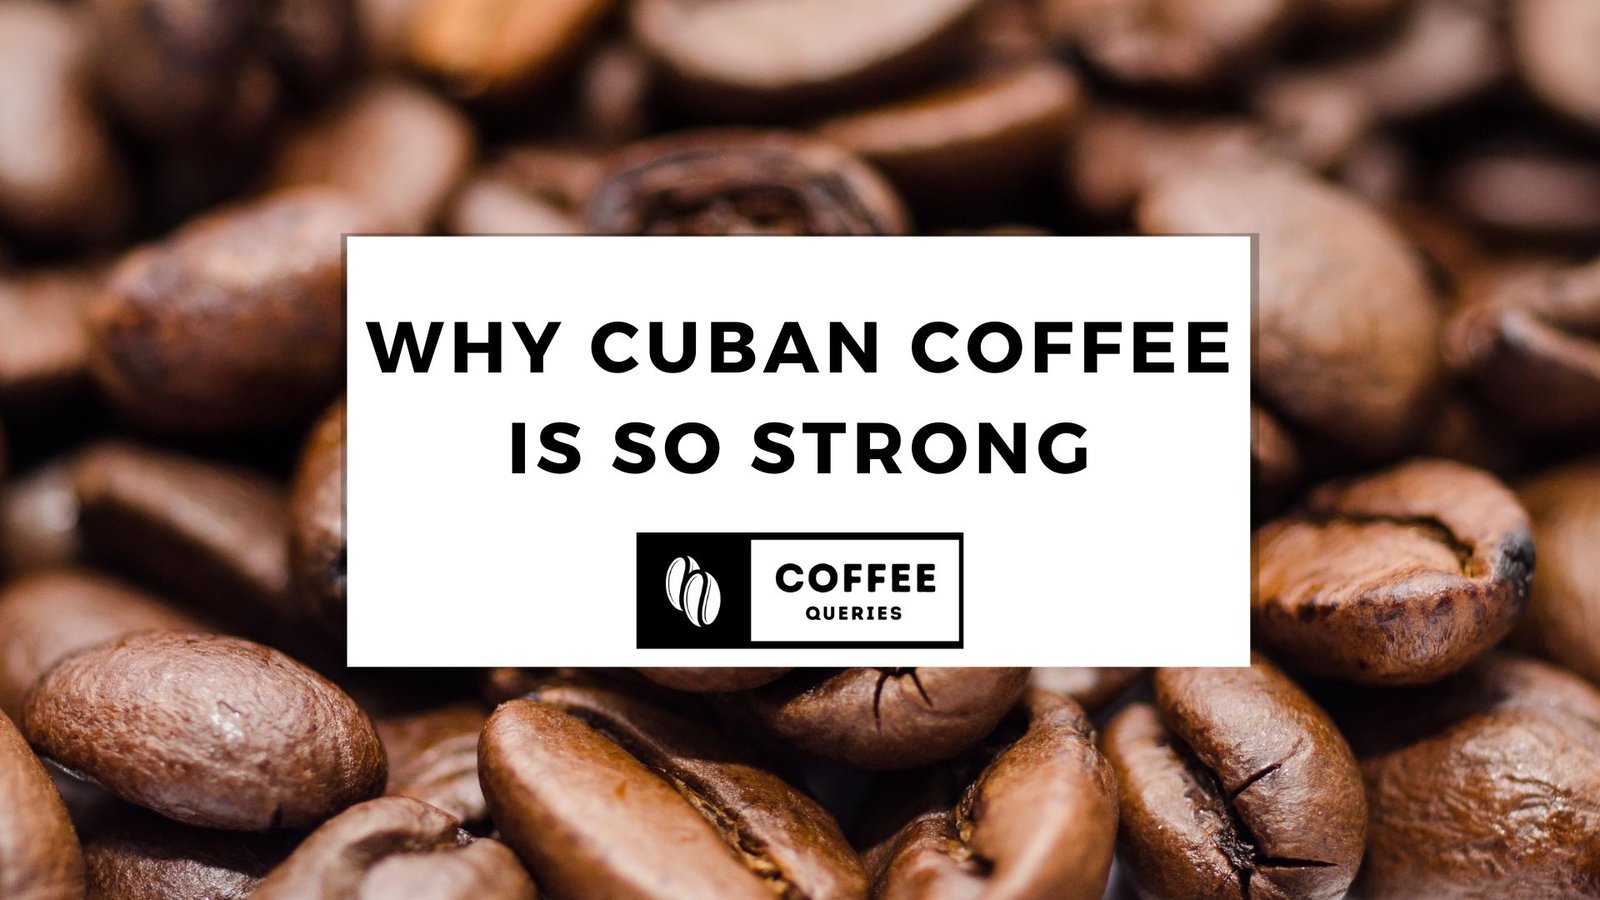 Why is Cuban Coffee so strong